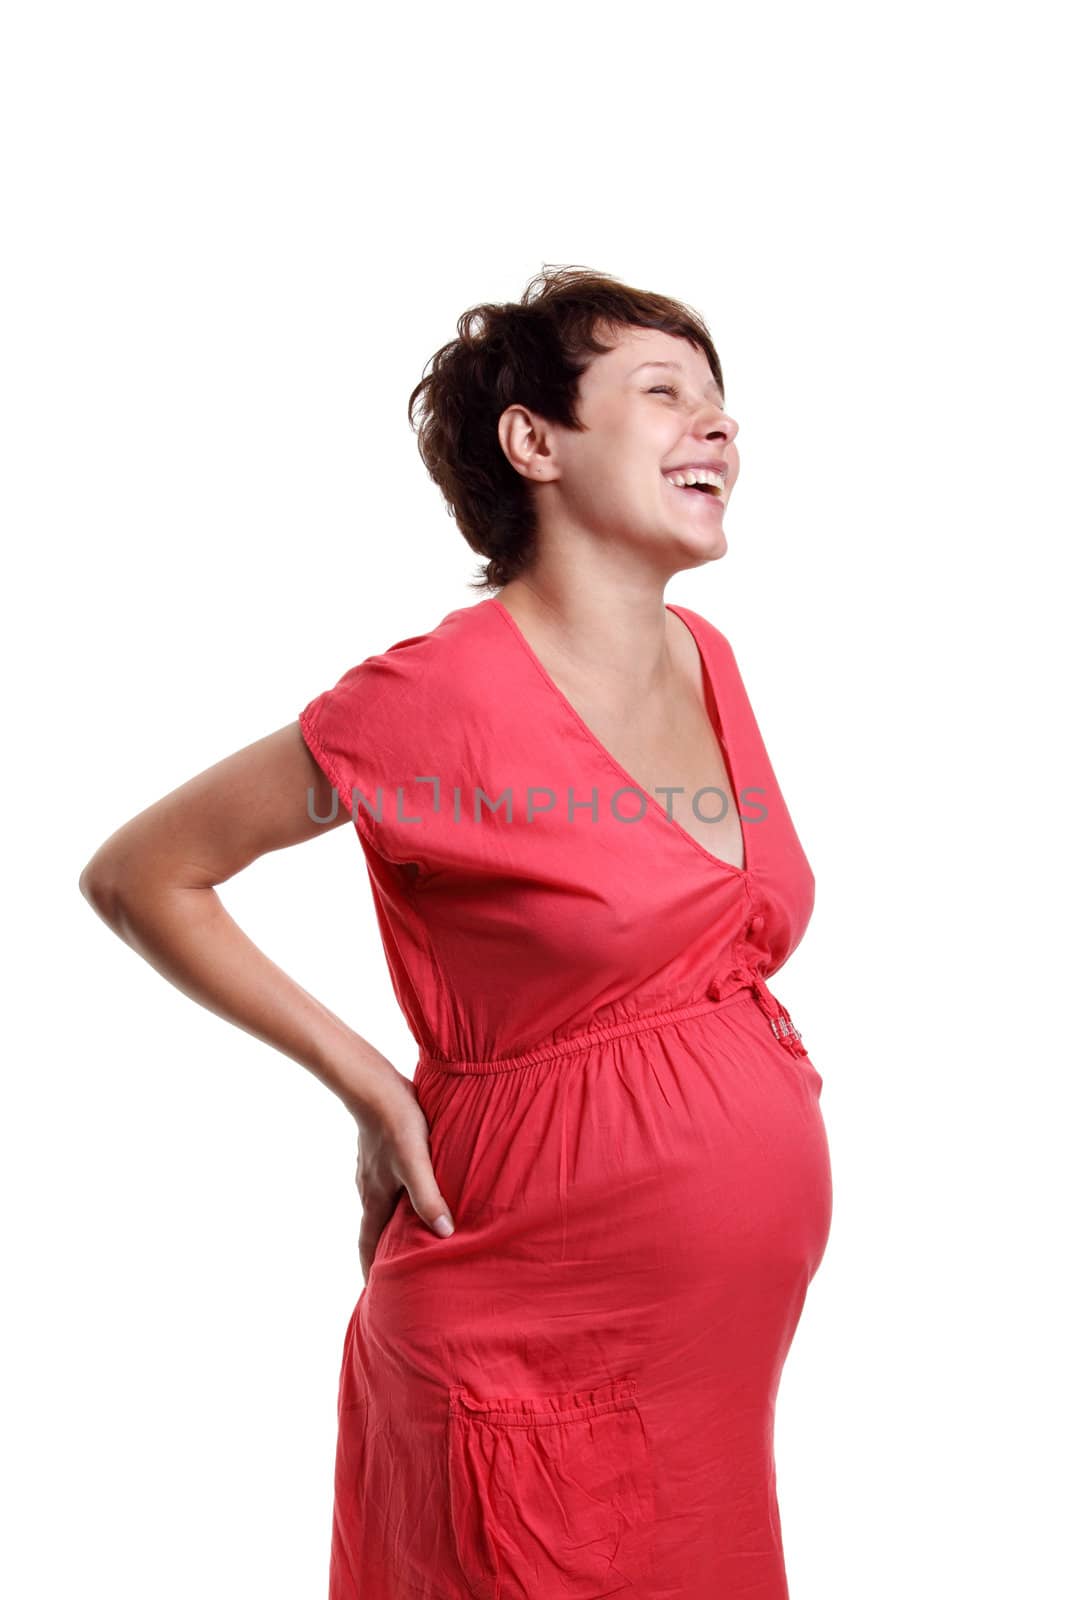 Pregnant young woman in a red shirt on the white background
